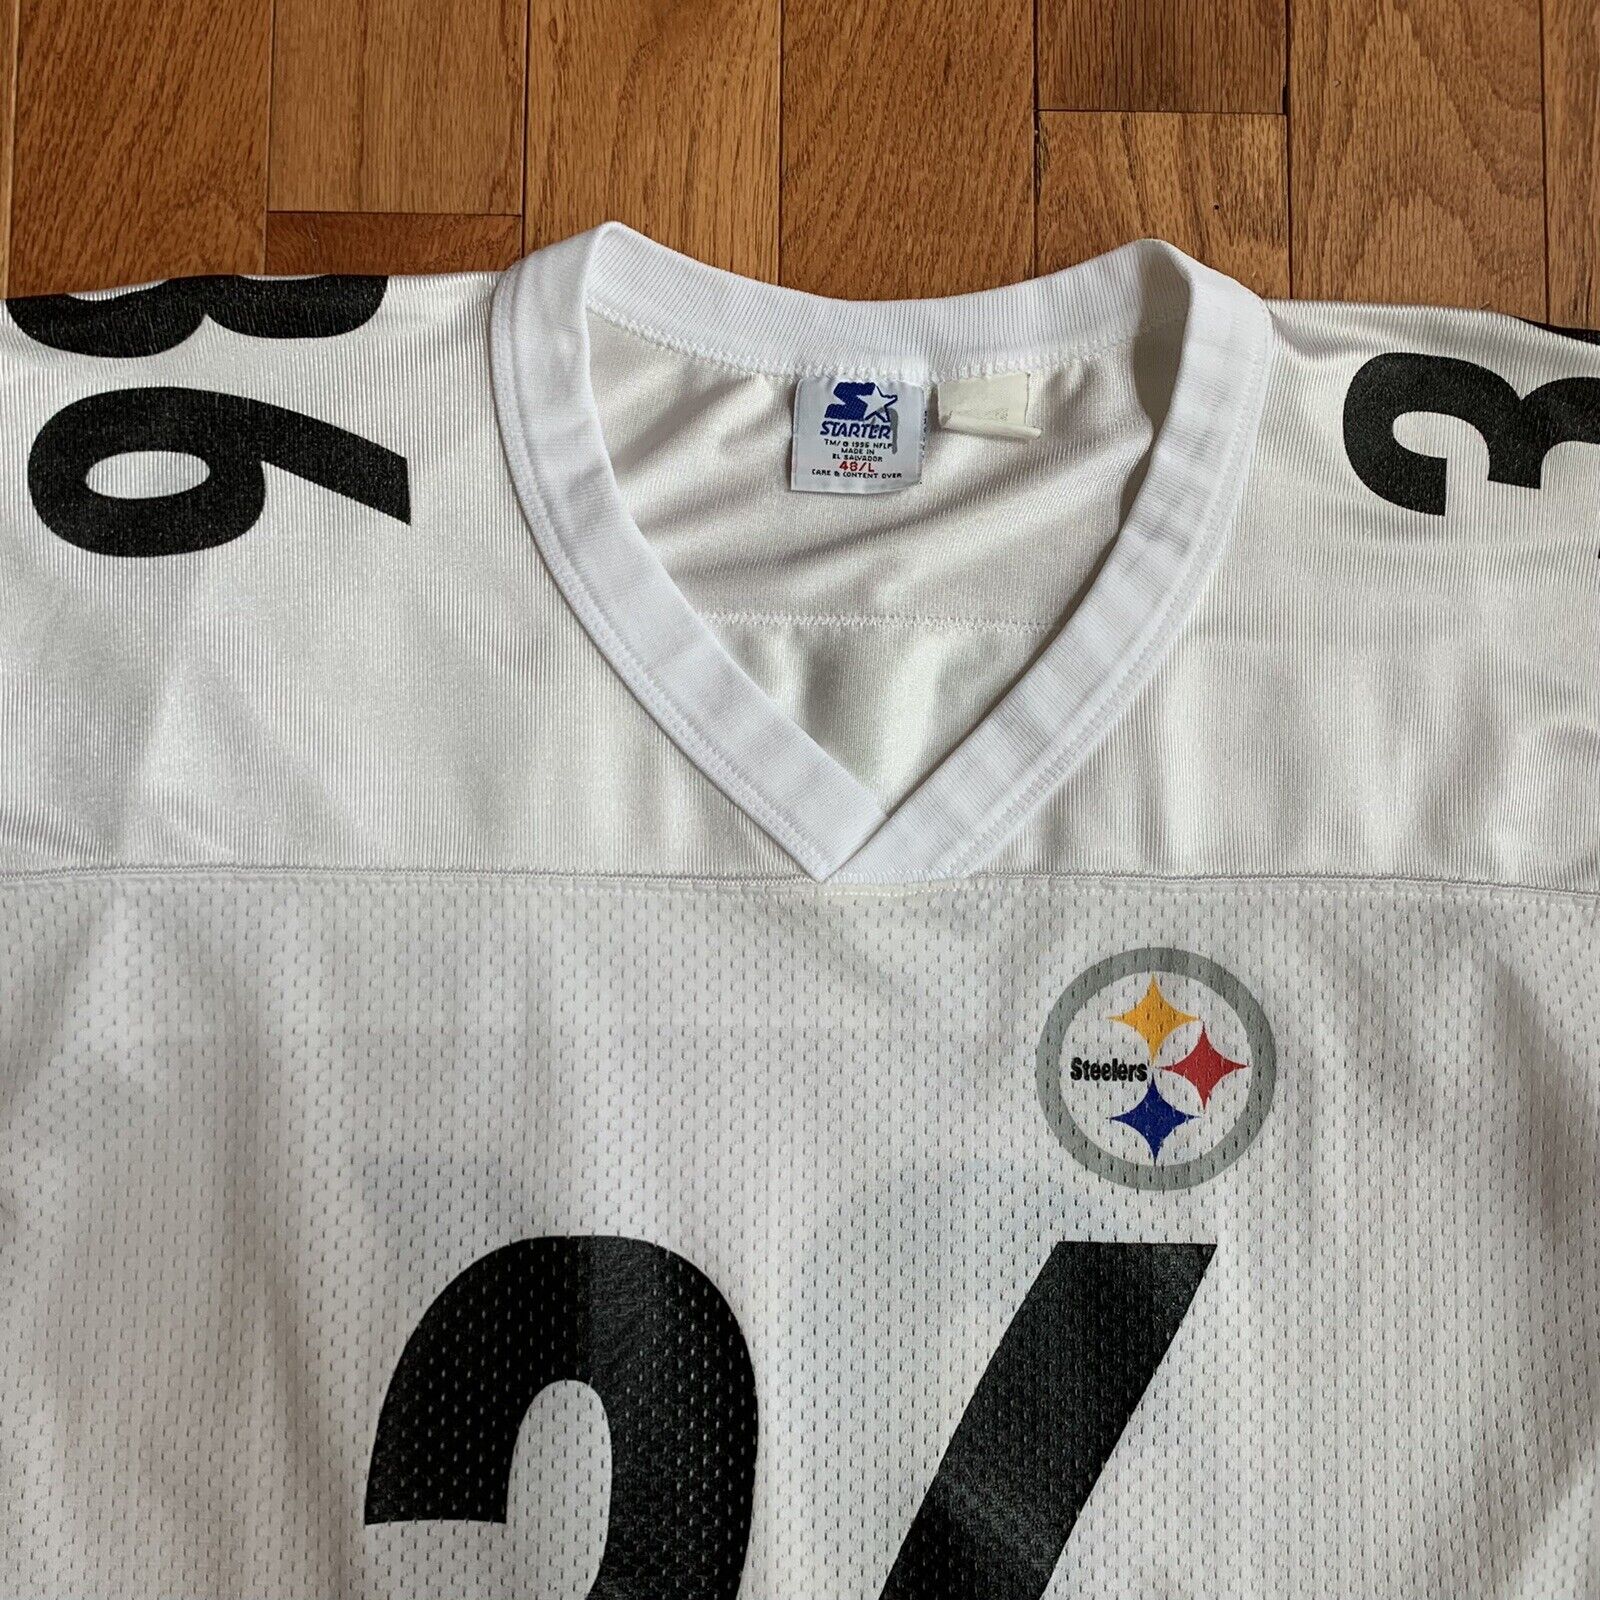 theboldenyears Vintage 90s Pittsburgh Steelers Jerome Bettis 36 Black Jersey, 90s Clothing, Vintage Starter Jersey, Players Inc, 90s Fashion, V Neck, Large